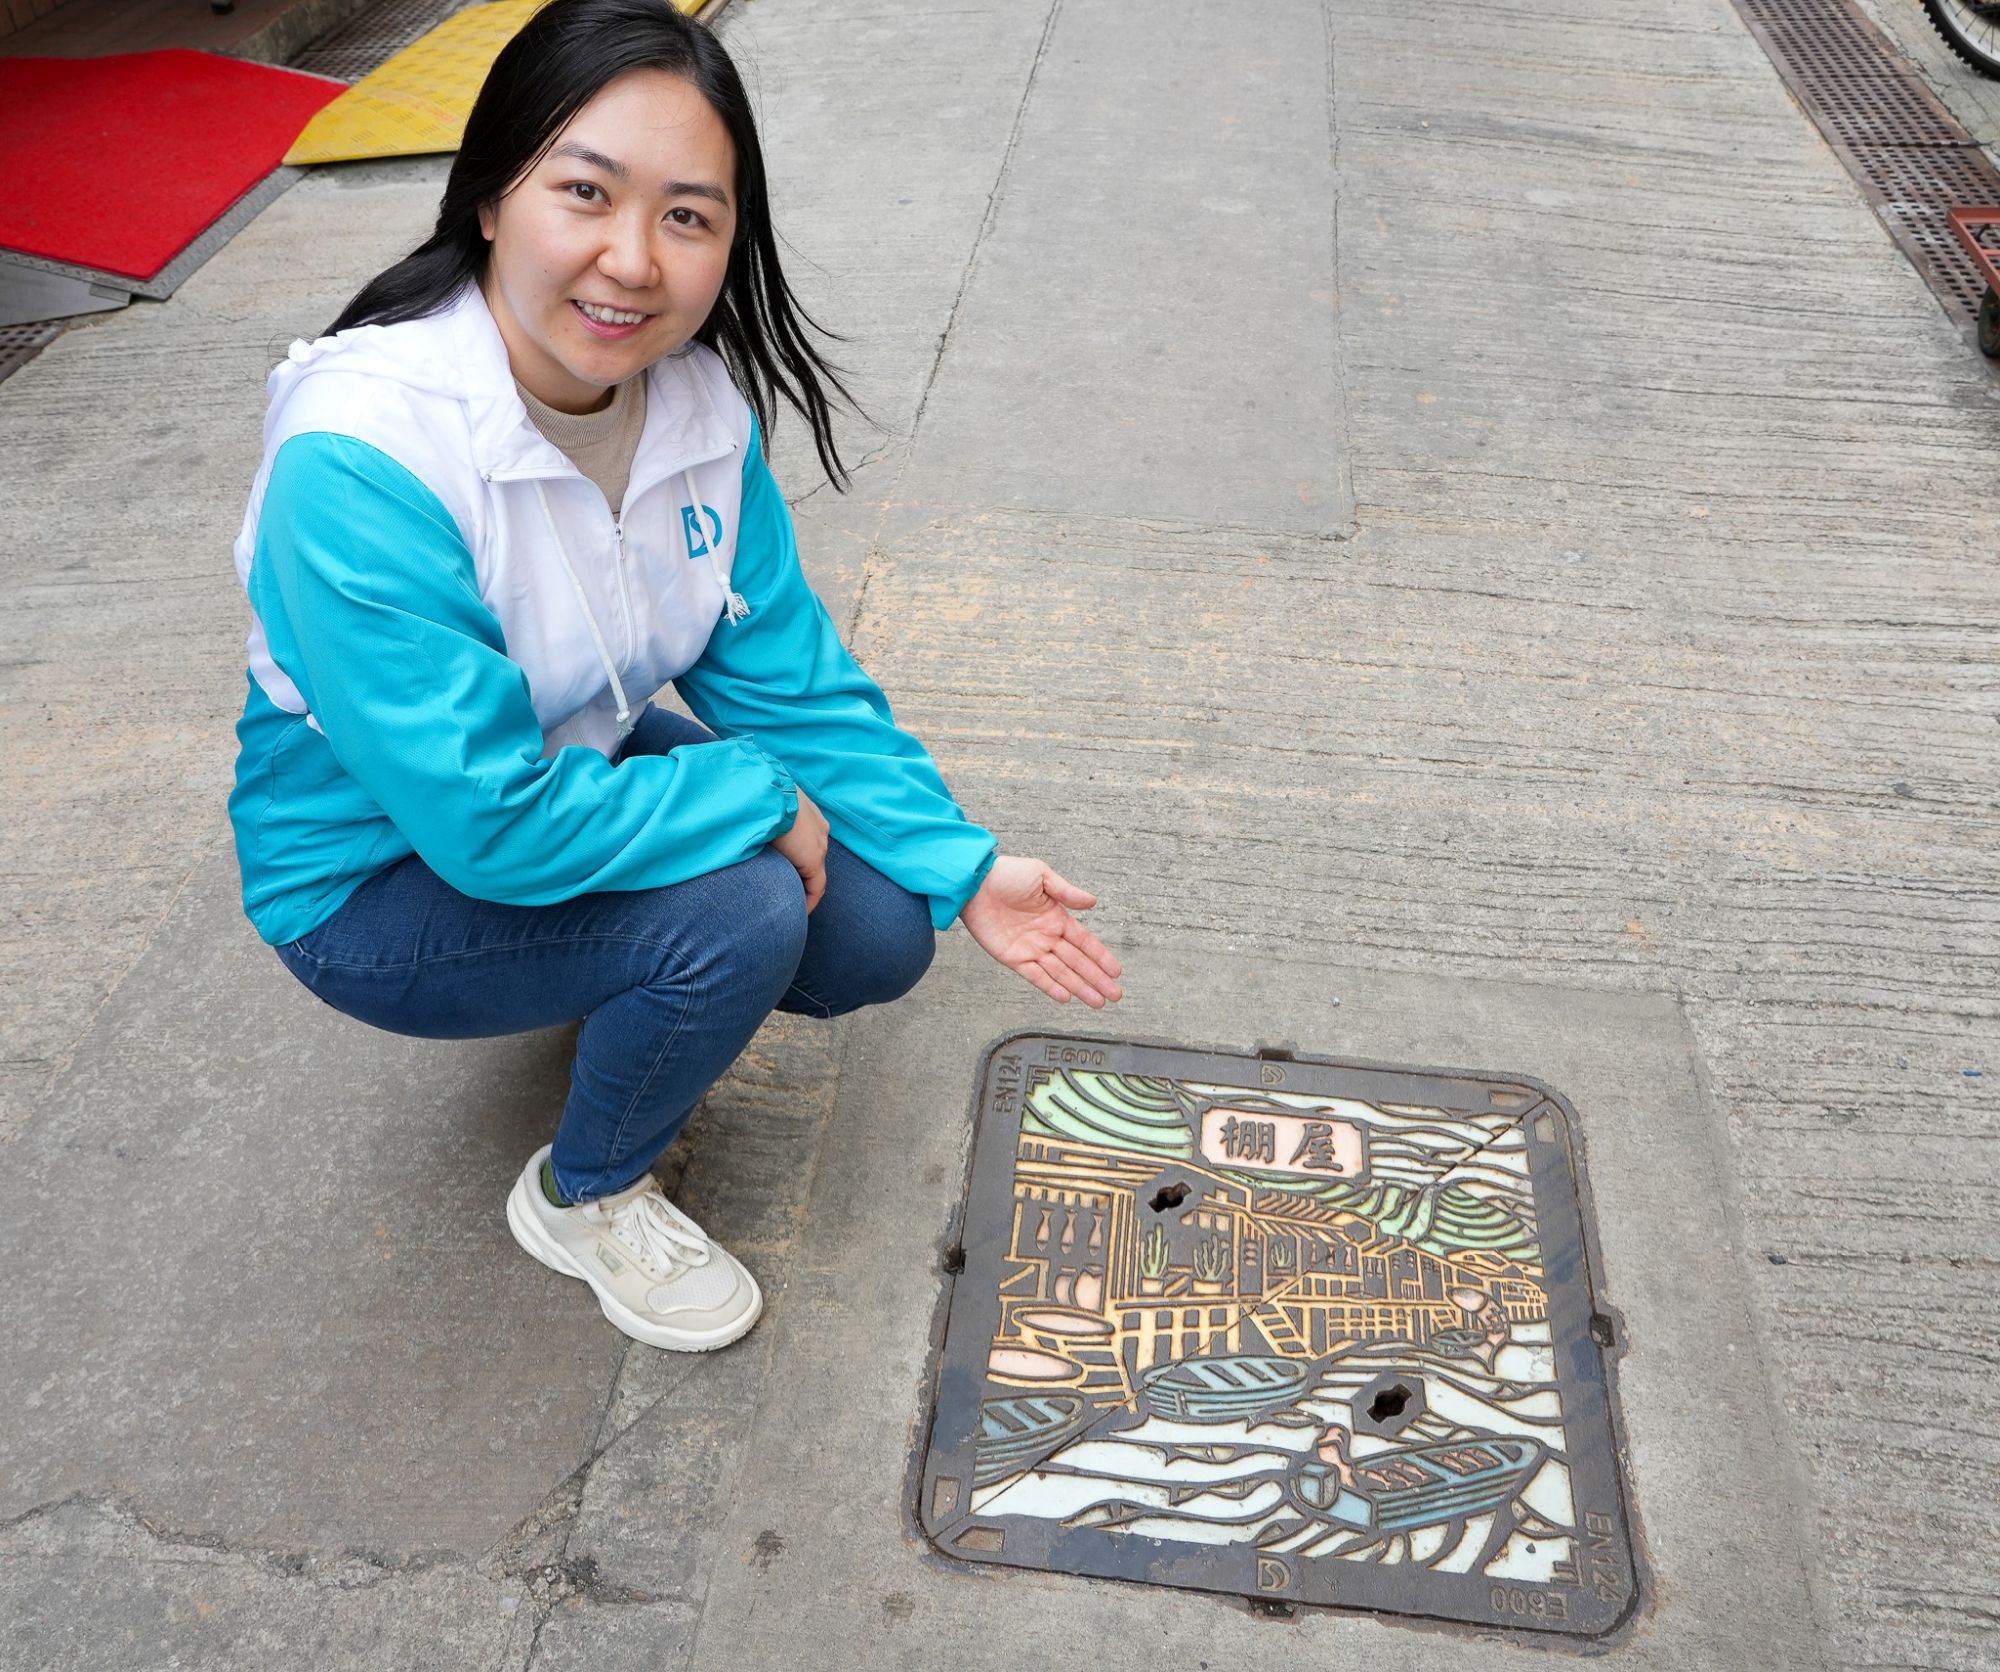 Ms QIU Yujing, Engineer (Consultants Management Division) of the DSD, introduces that the DSD has identified a few tourist attractions with local characteristics and high pedestrian flow to install thematic manhole covers since 2022.